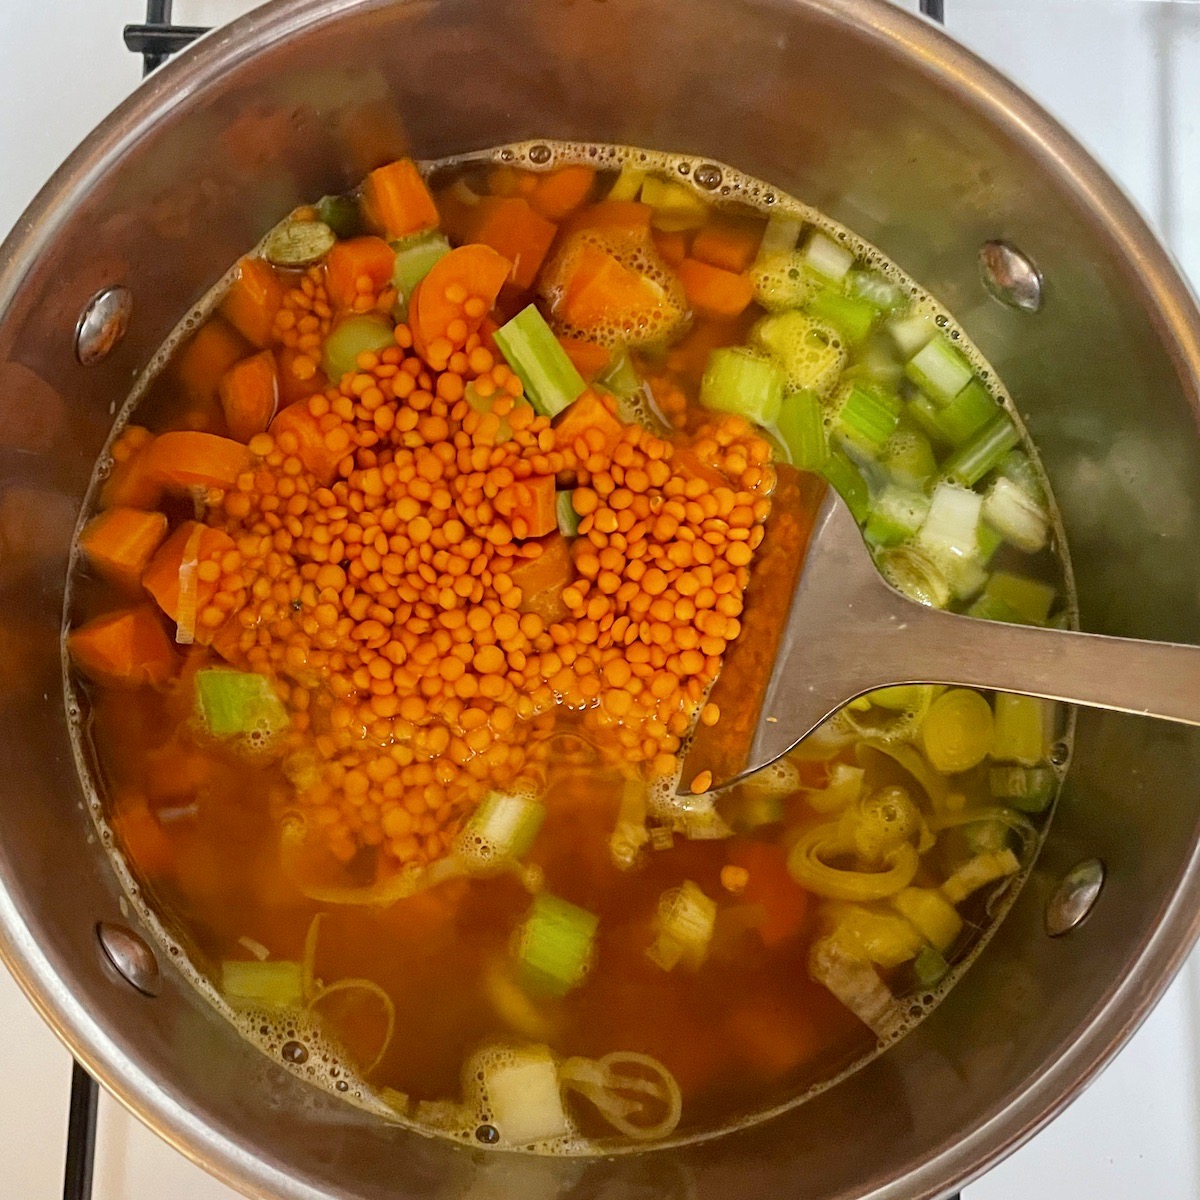 Overhead view of soup ingredients in a pan.